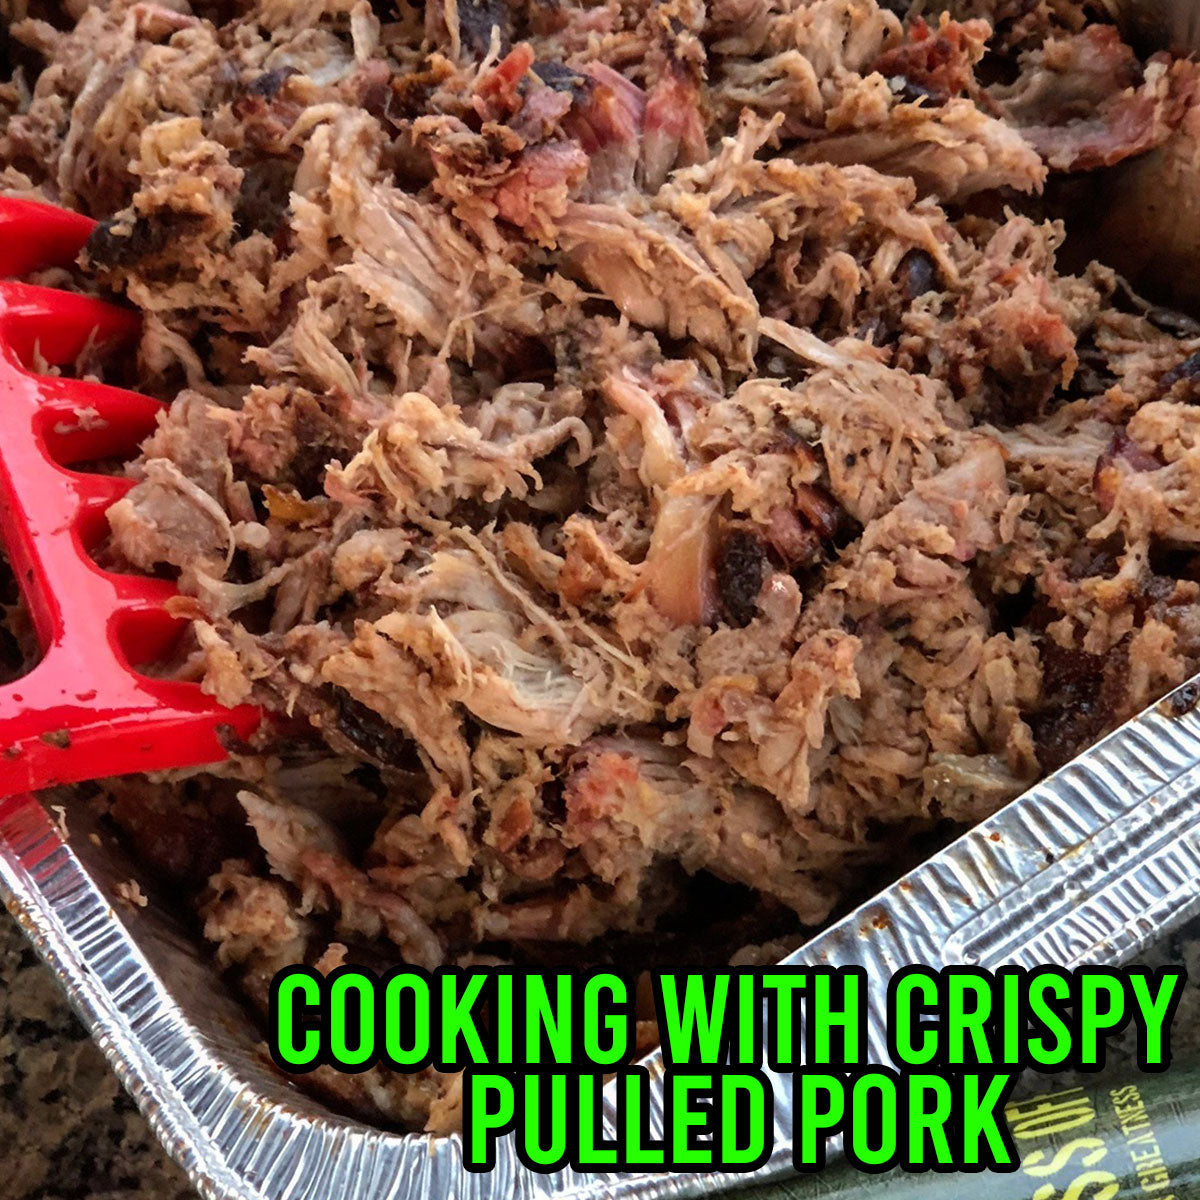 Cooking With Crispy Pulled Pork | Grill Your Ass Off